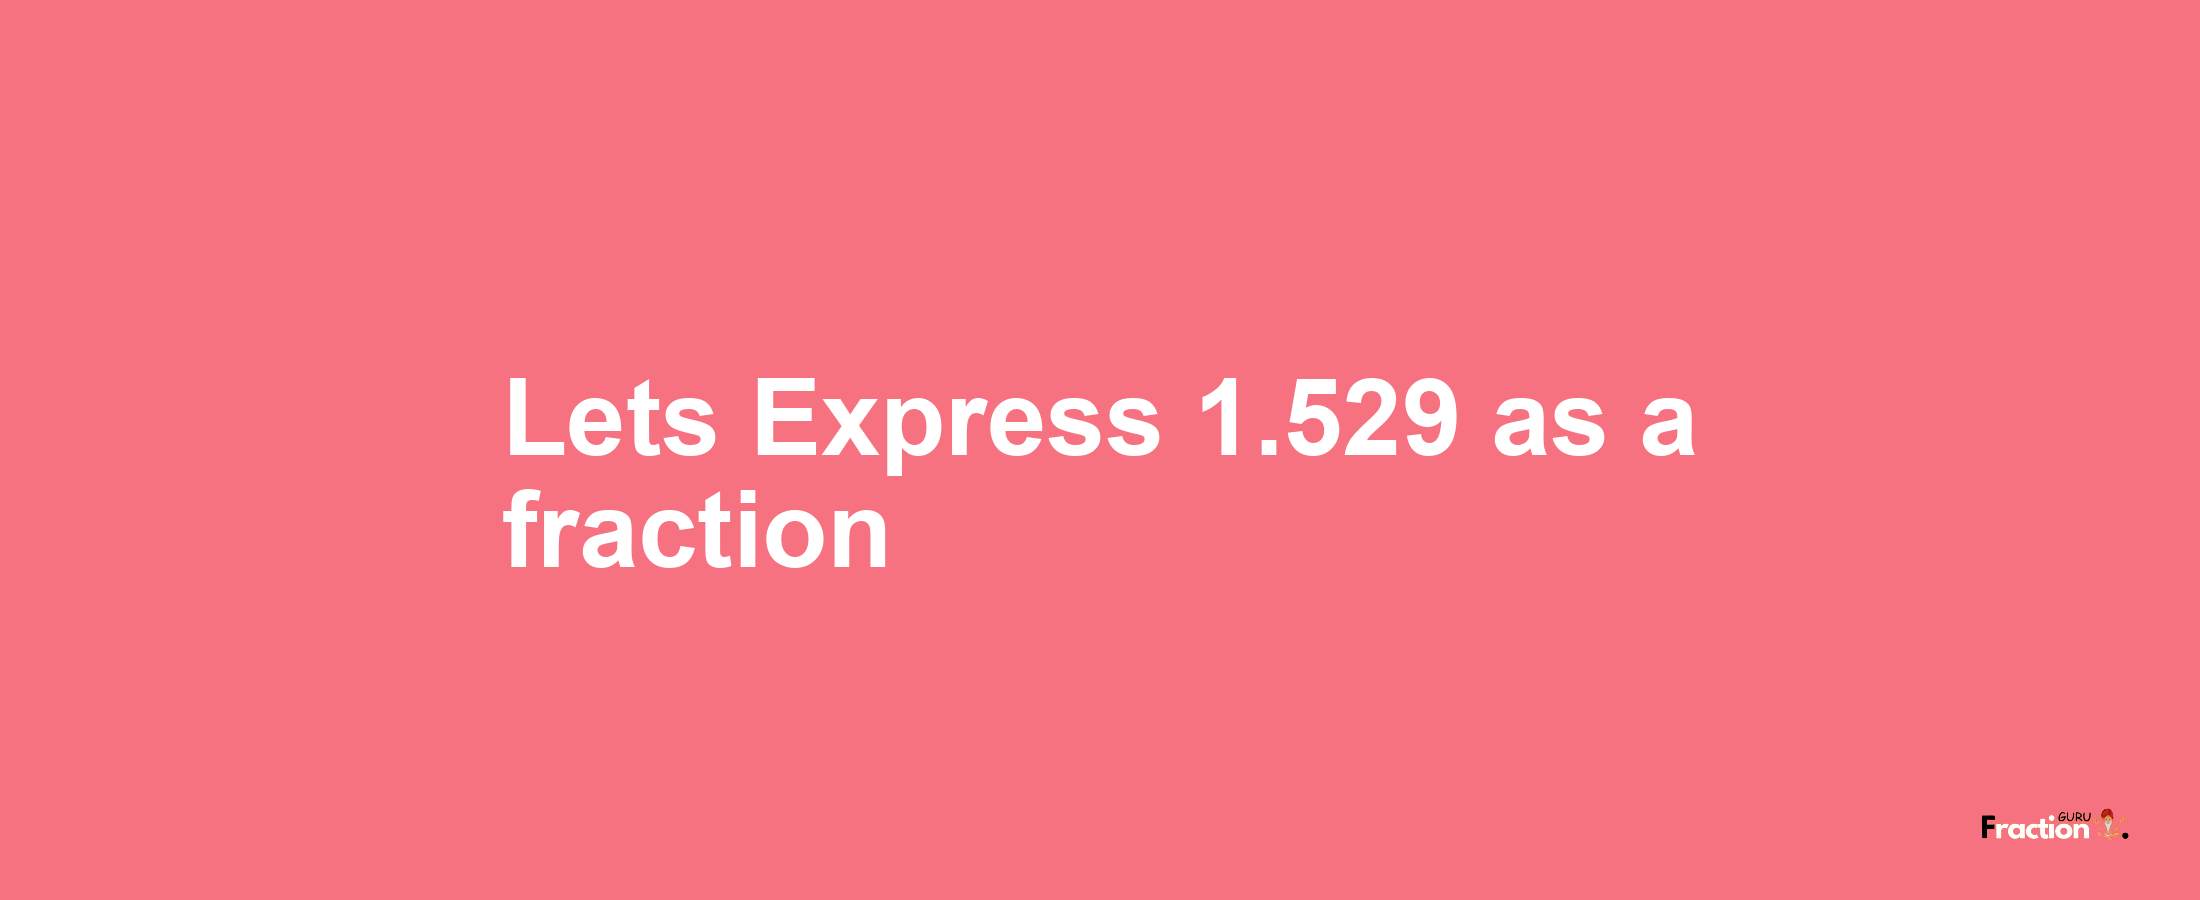 Lets Express 1.529 as afraction